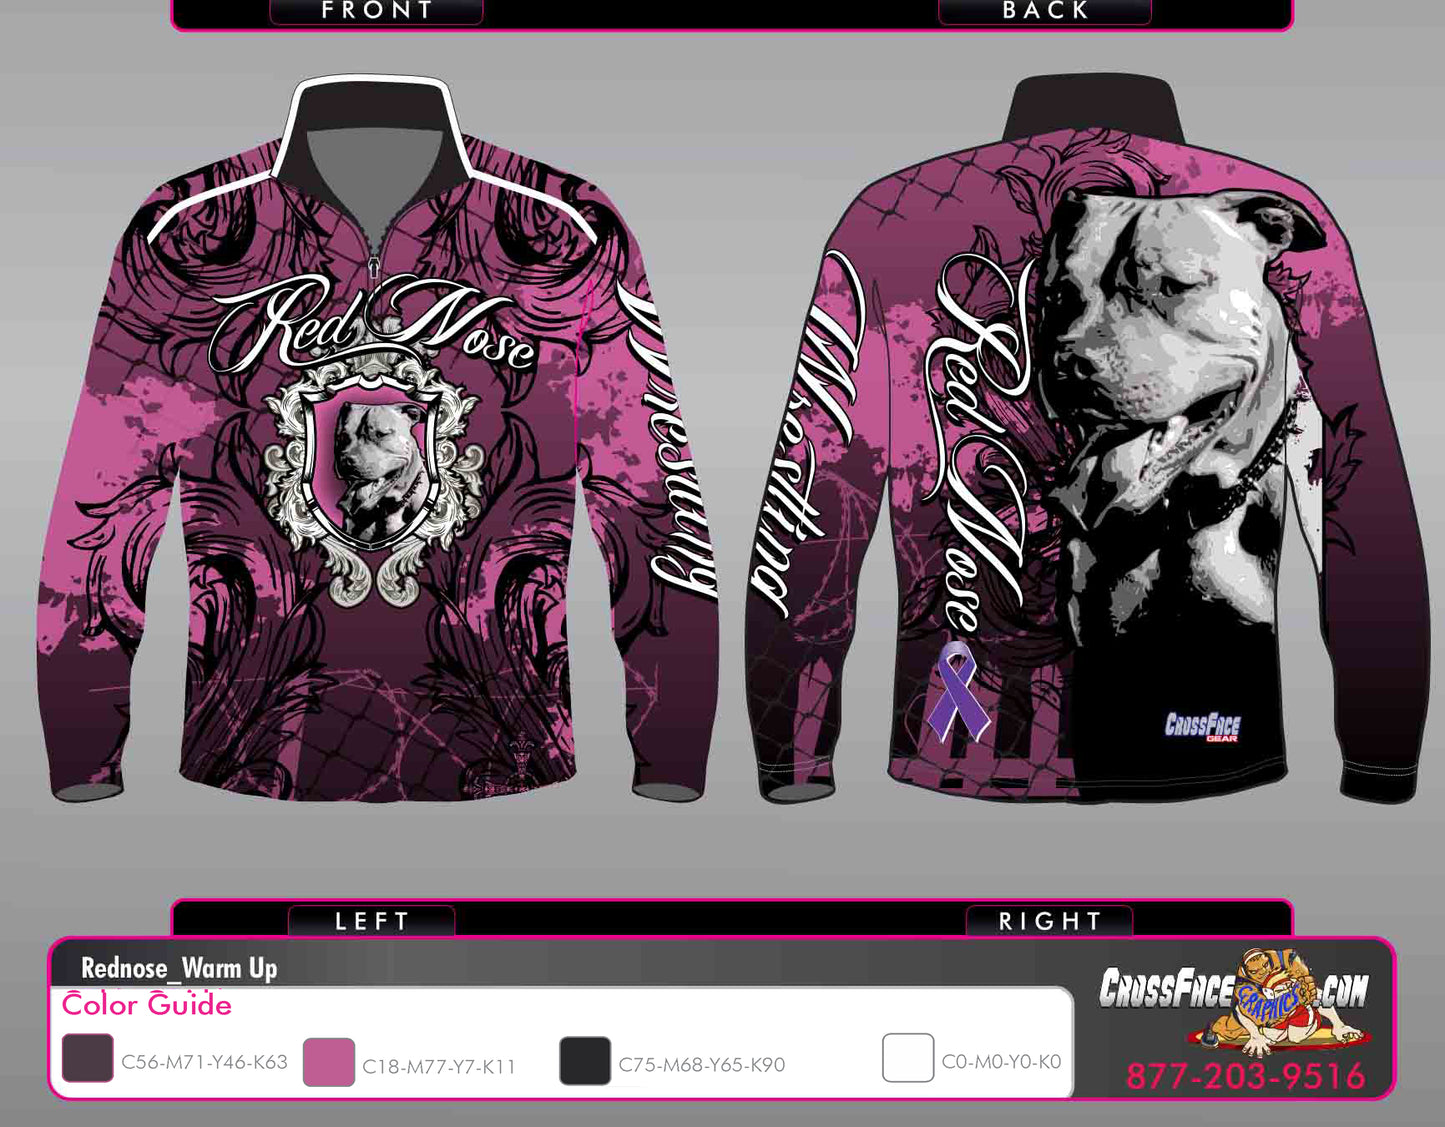 Red Nose Wrestling Full Sublimated 1/4 Zip Warm Up (PINK) 2017